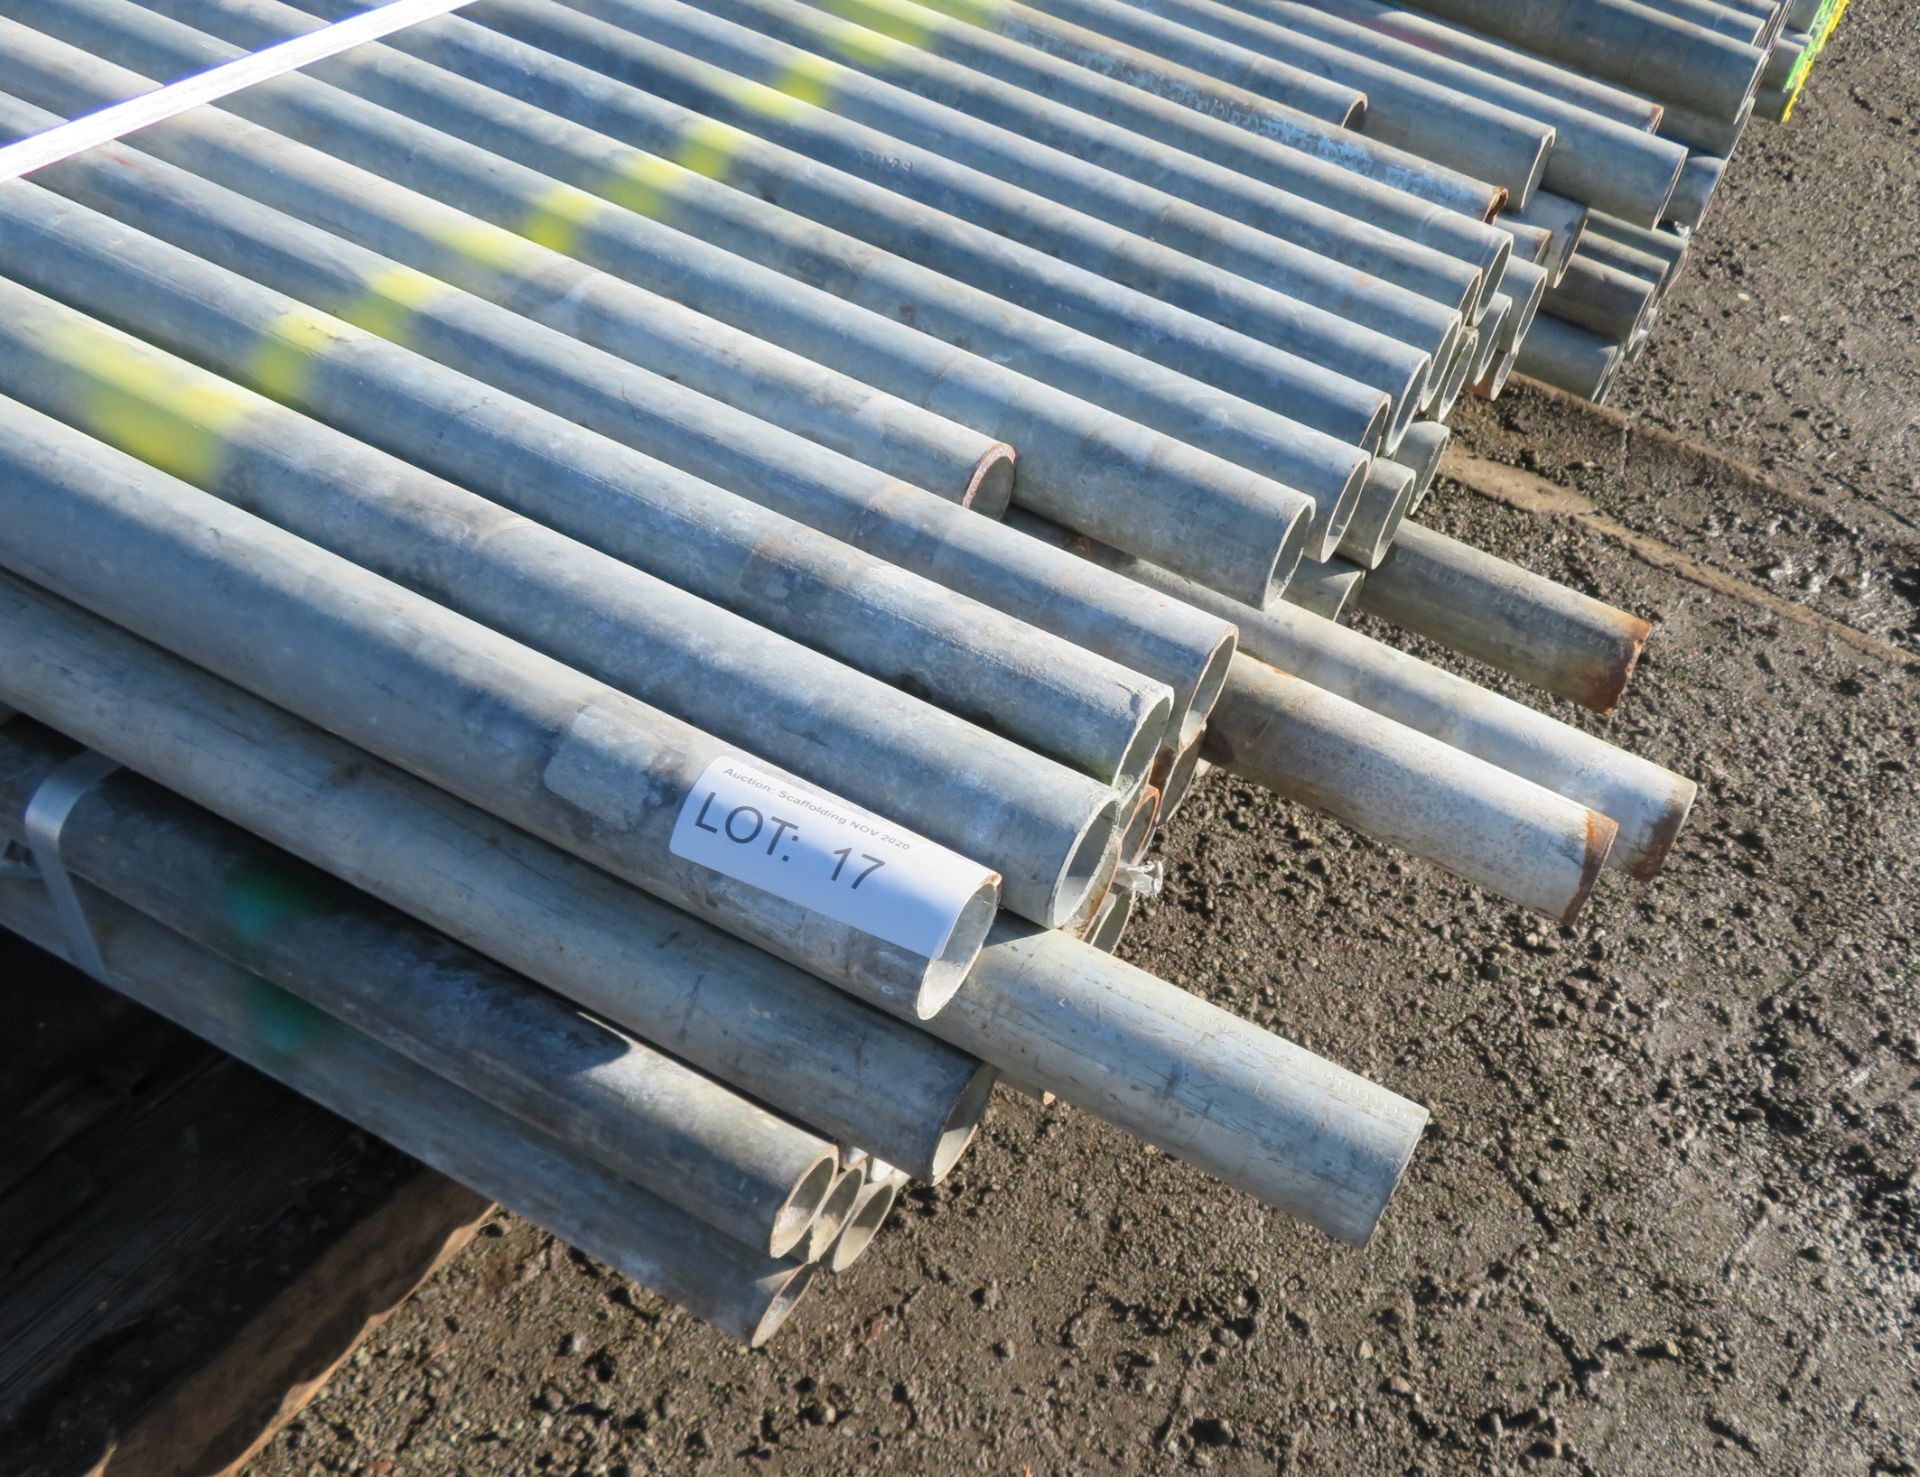 100x 10ft Galvanised Steel Scaffolding Poles 48mm Diameter x 4mm Thick. - Image 5 of 6